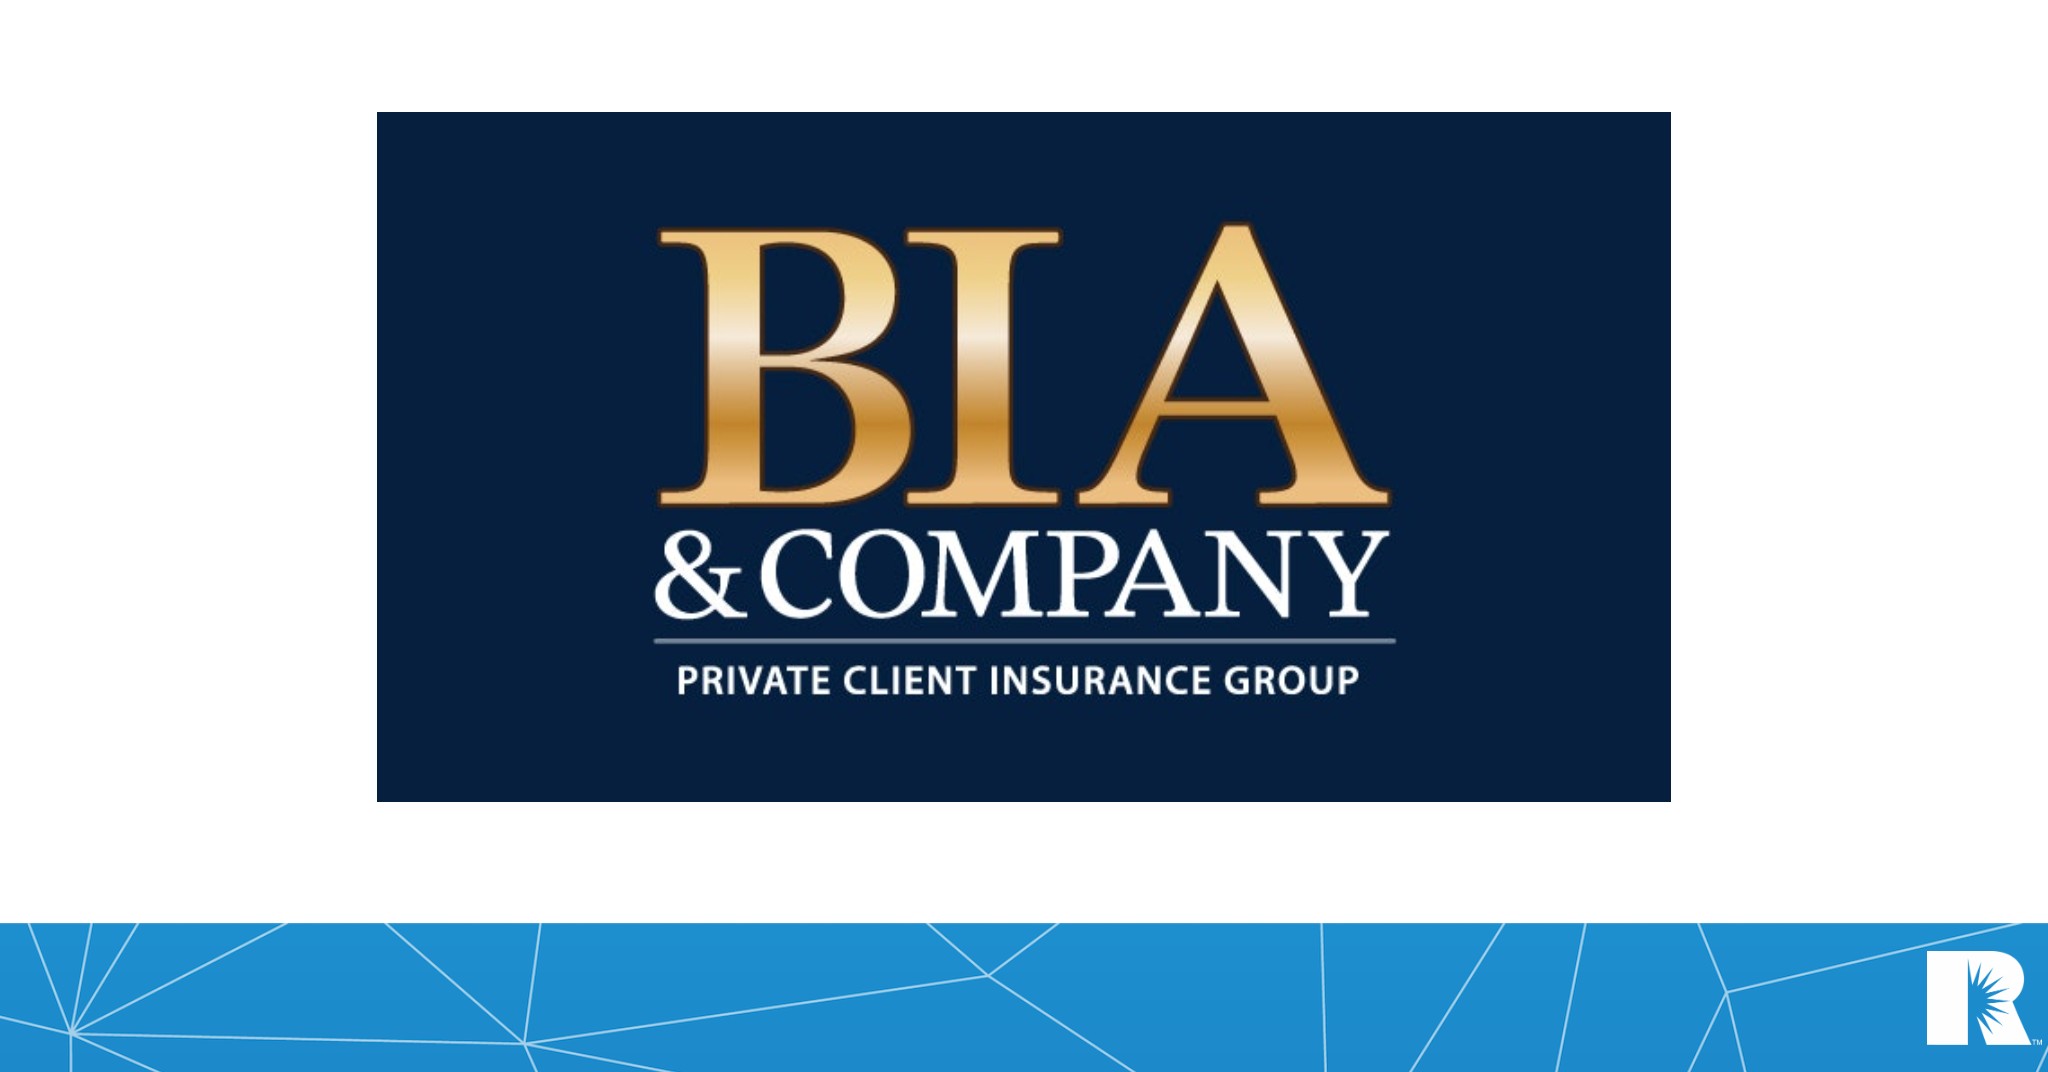 The agency logo for BIA and Company.